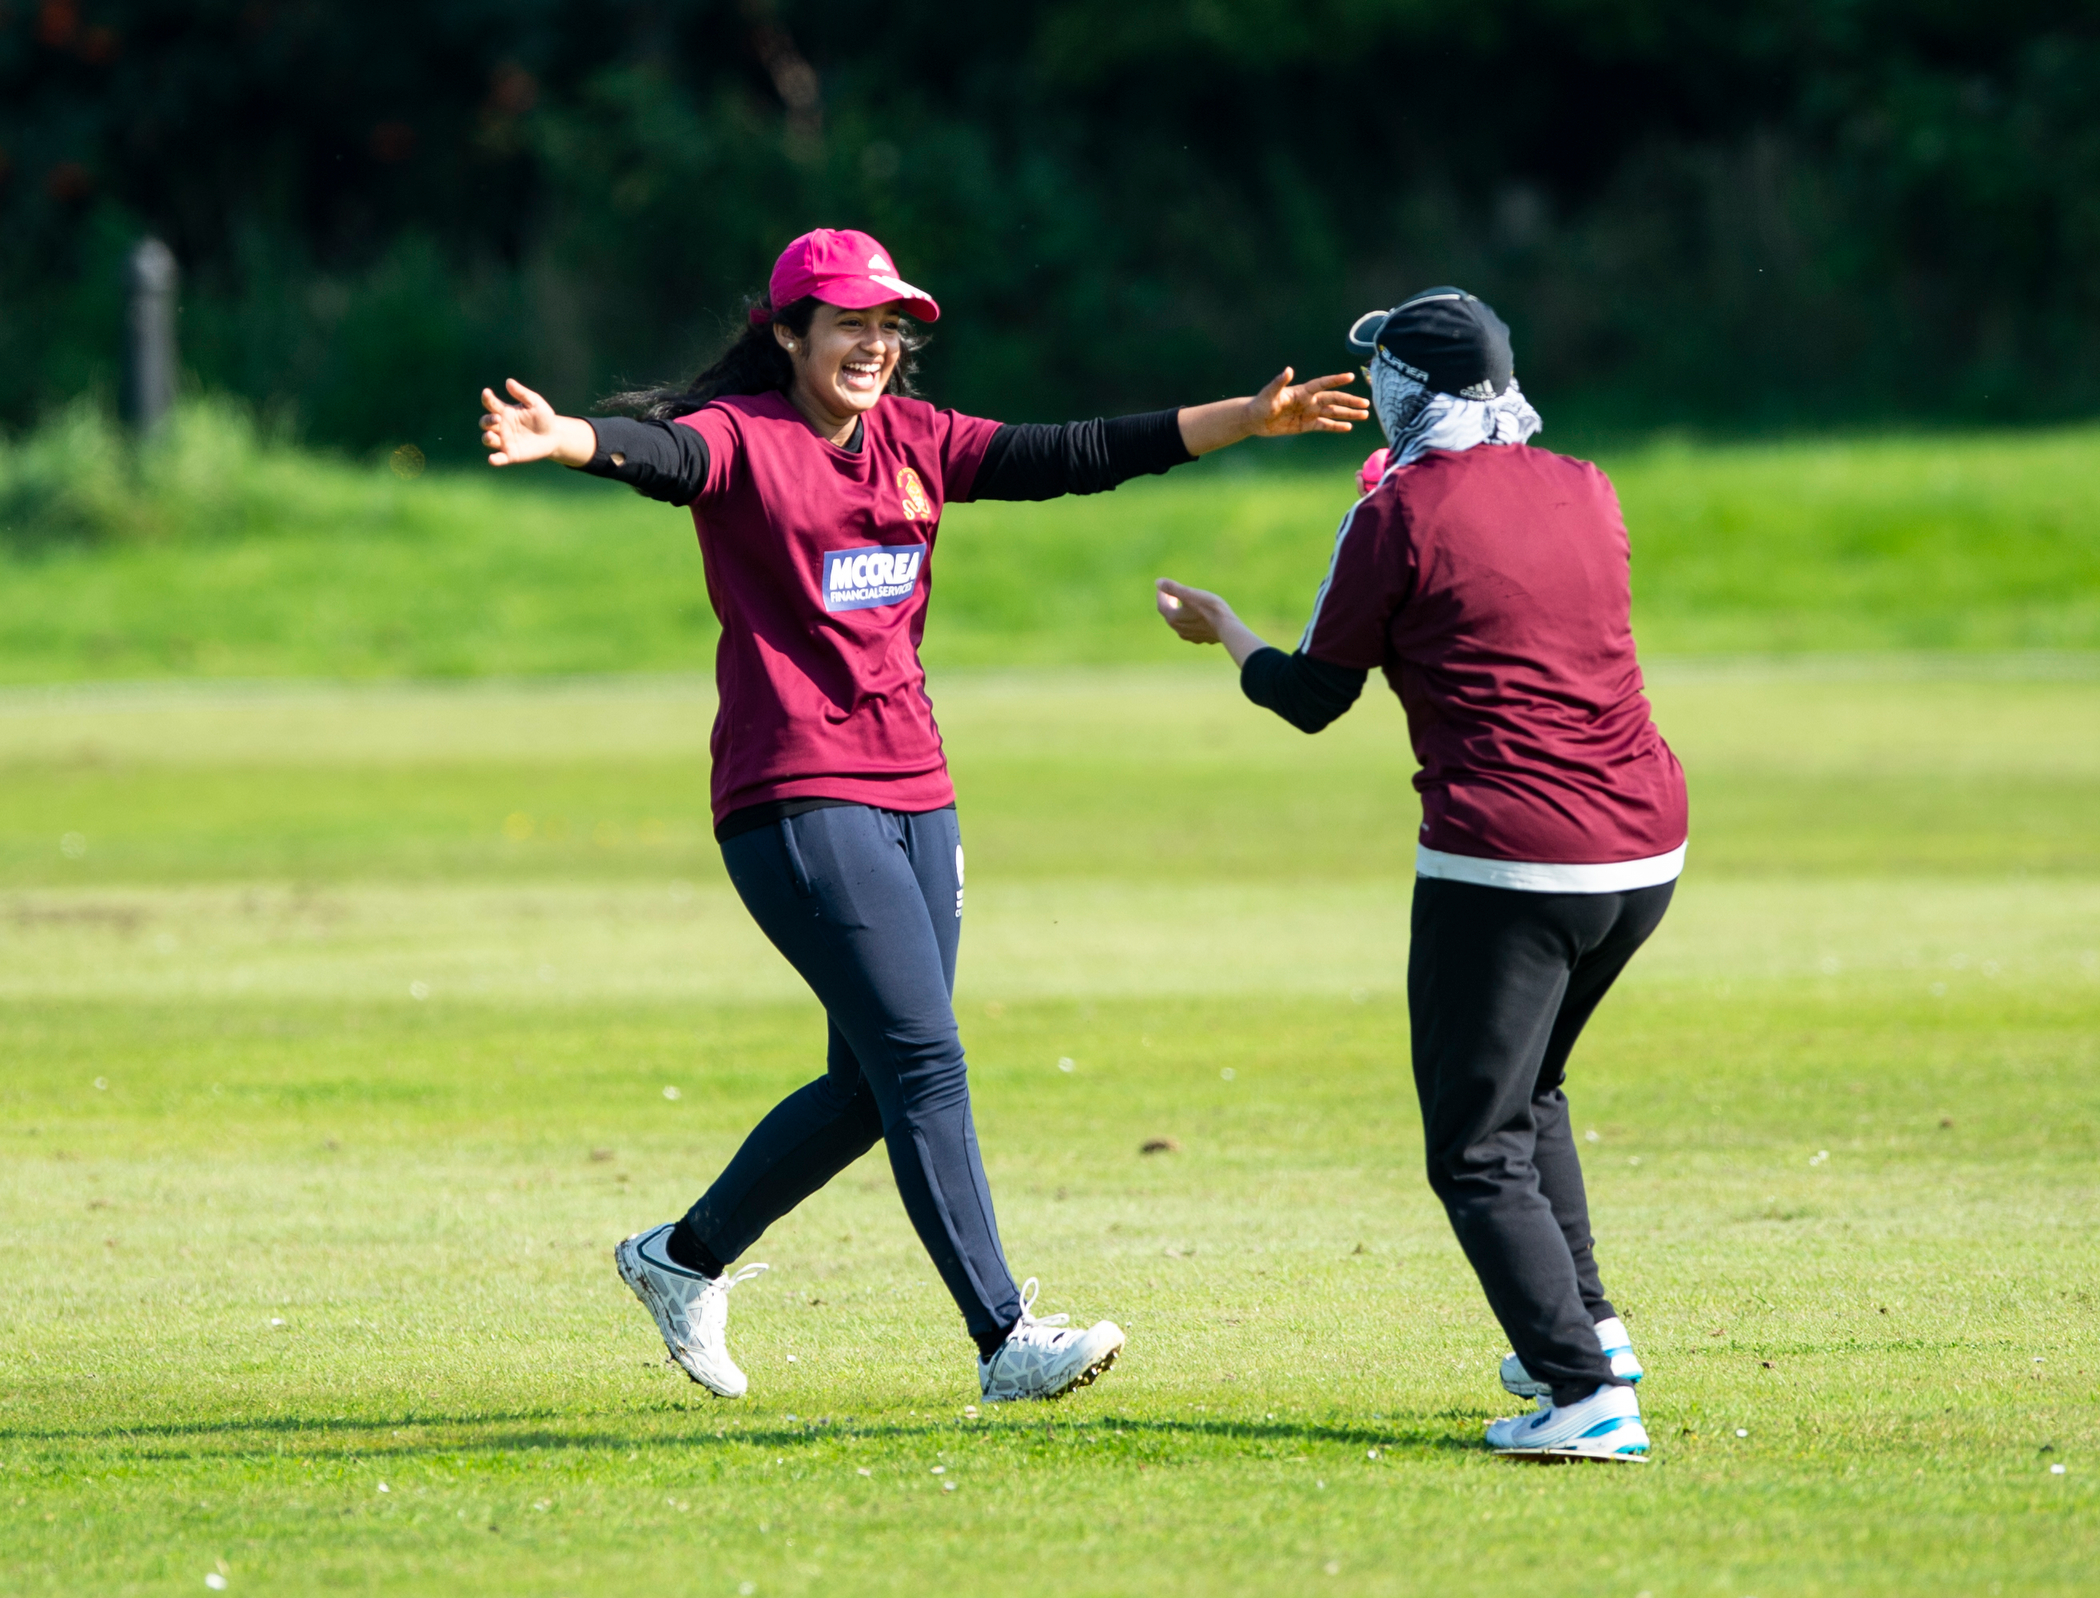 Cricket Scotland Annual Report highlights growth and diversity